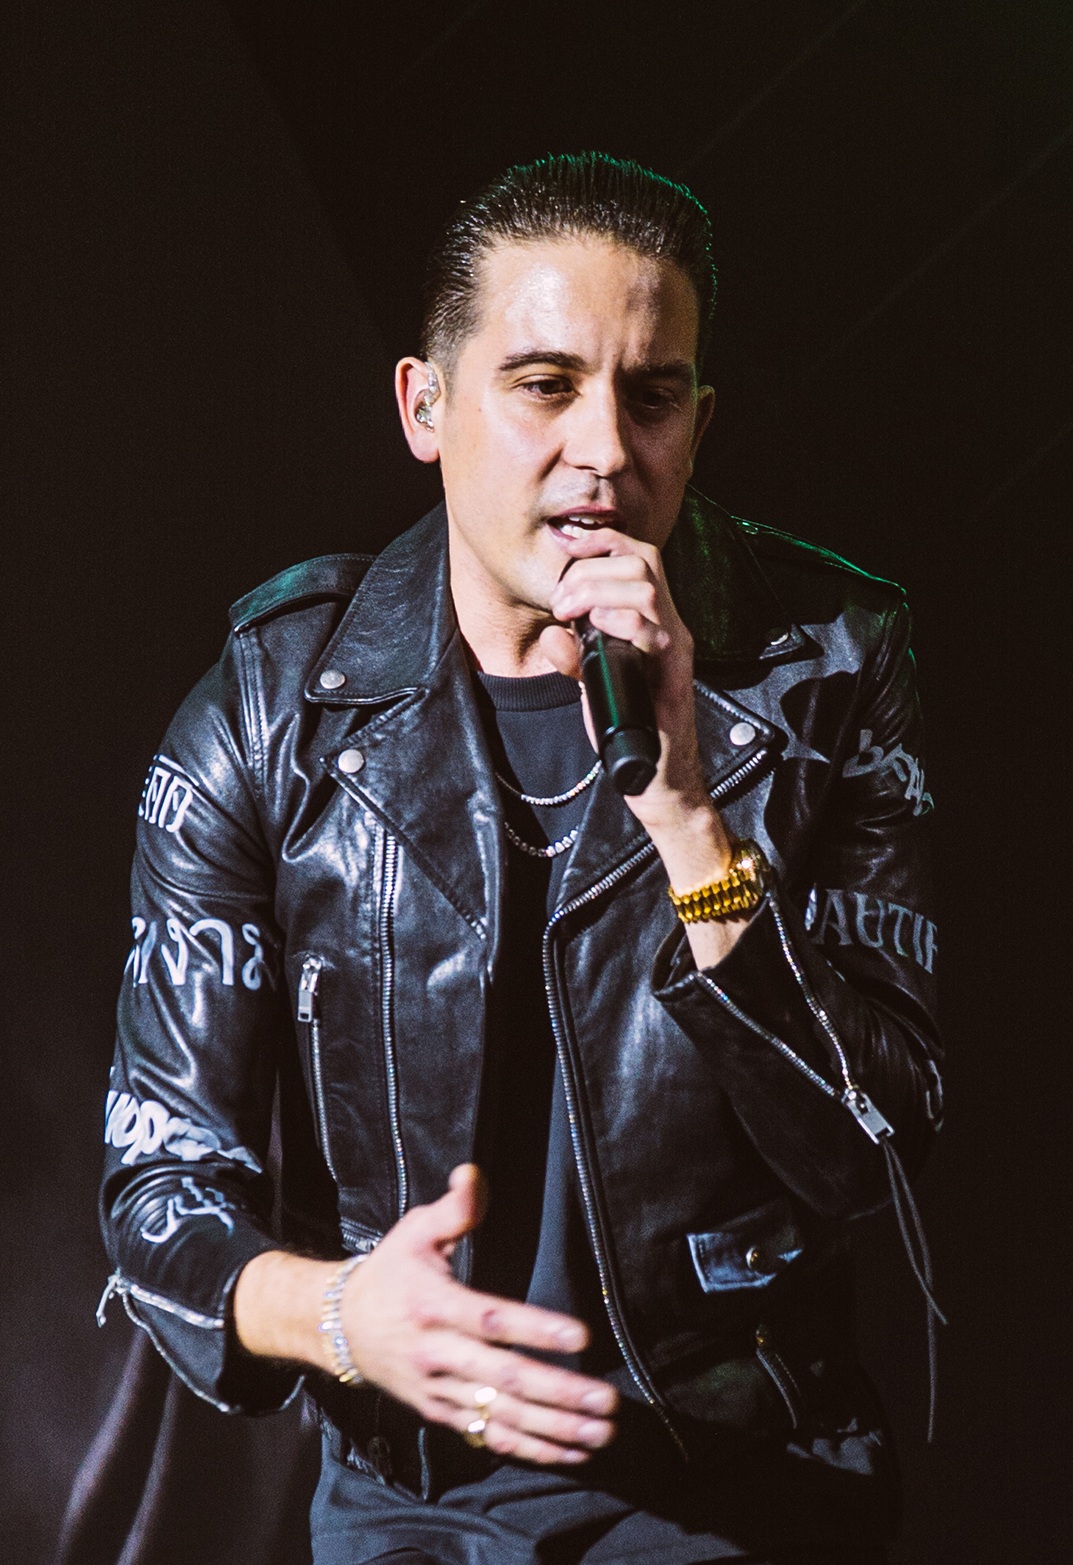 Rapper, G-Eazy pens tribute to his now deceased mom